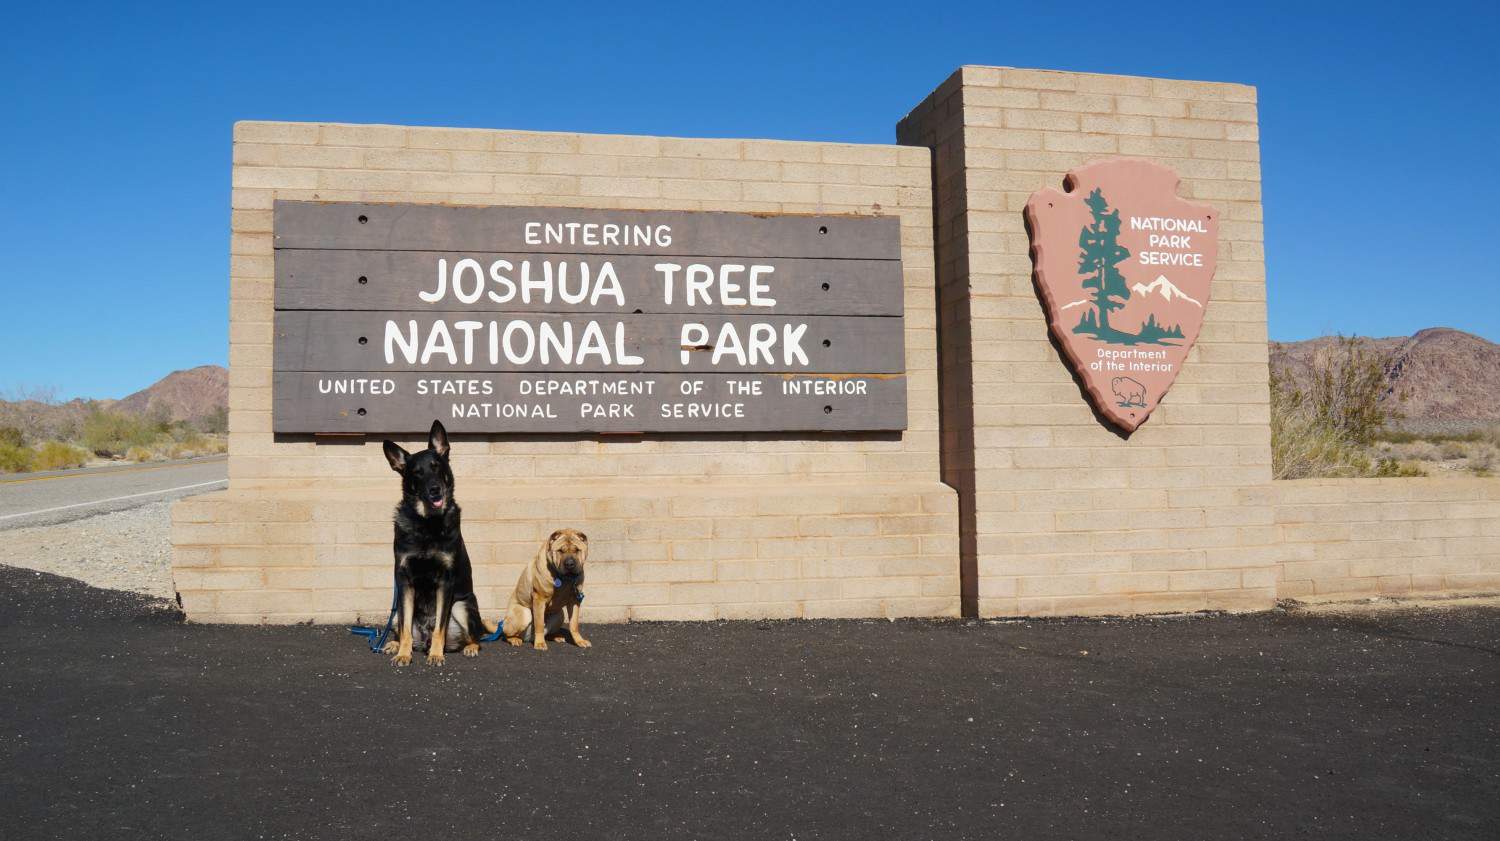 Buster and Ty in Joshua Tree National Park - Palm Springs, California